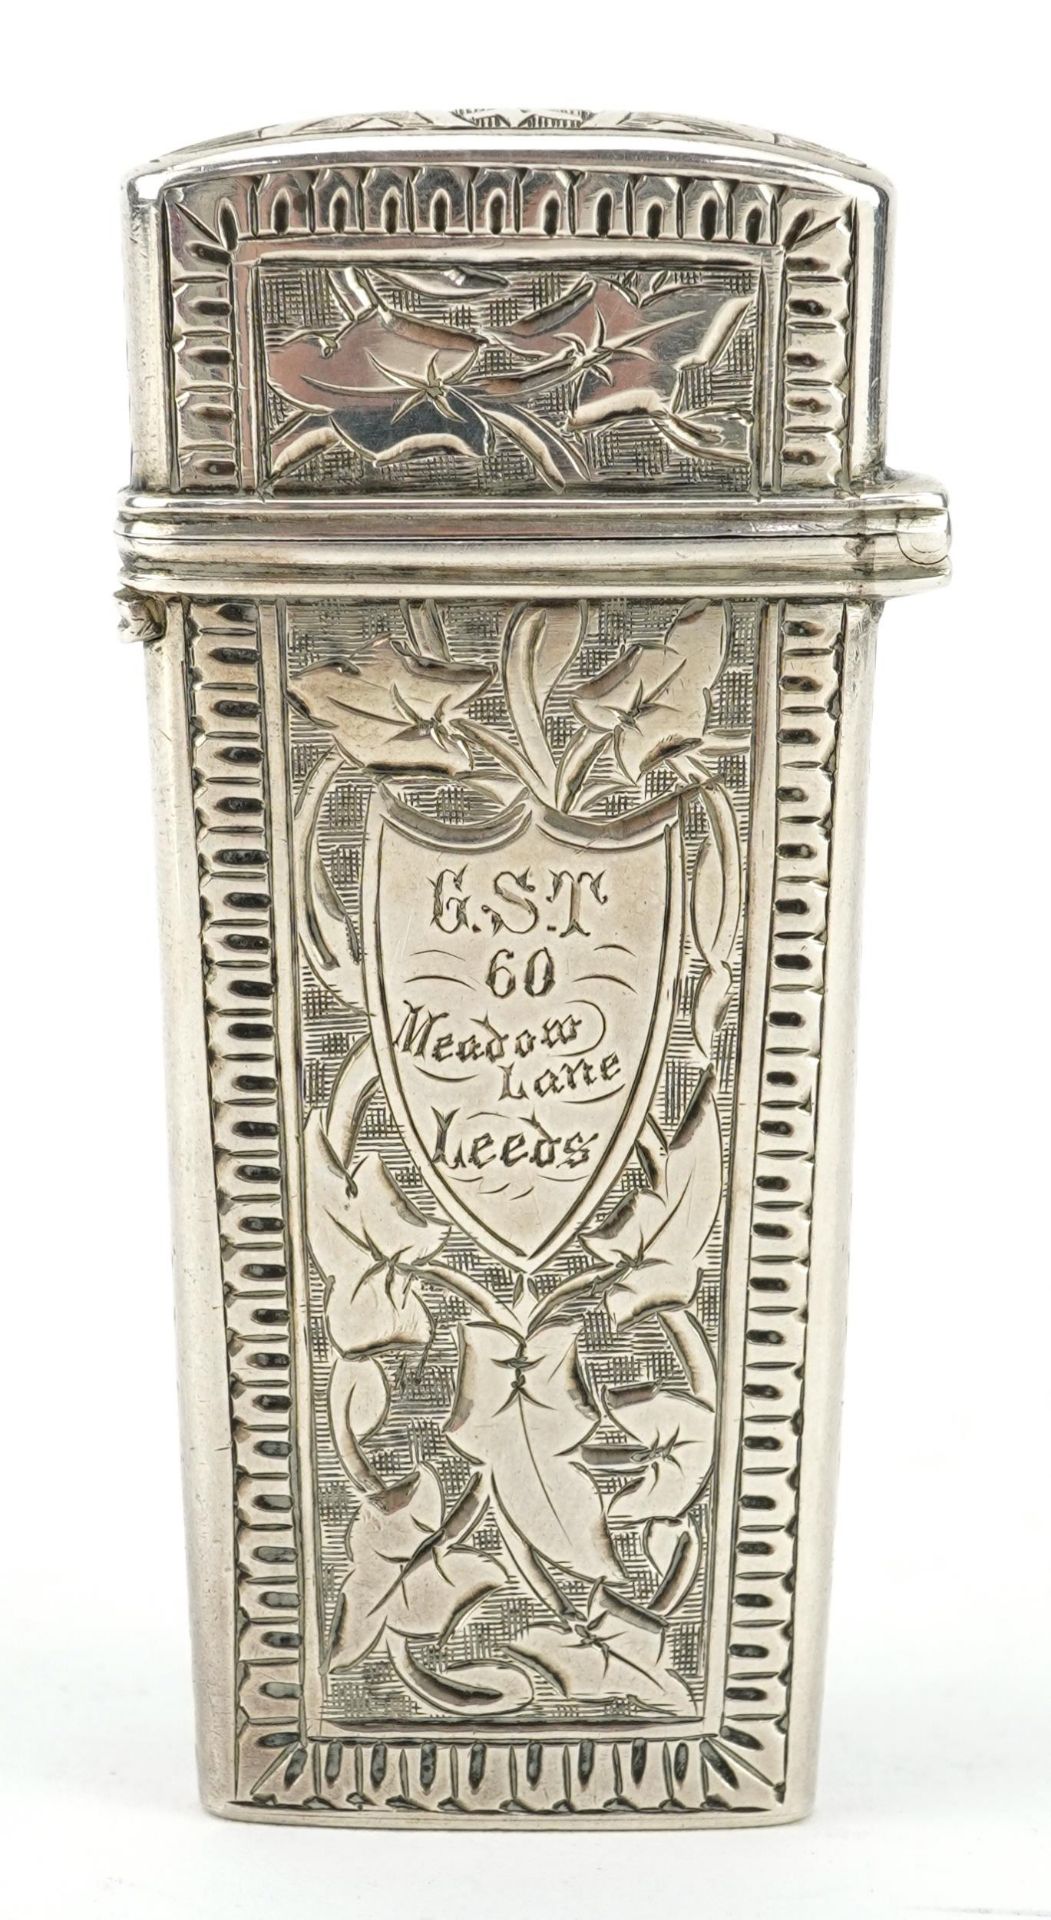 Hilliard & Thomason, Victoria silver needle case engraved with ivy leaves on vines, Birmingham 1878,